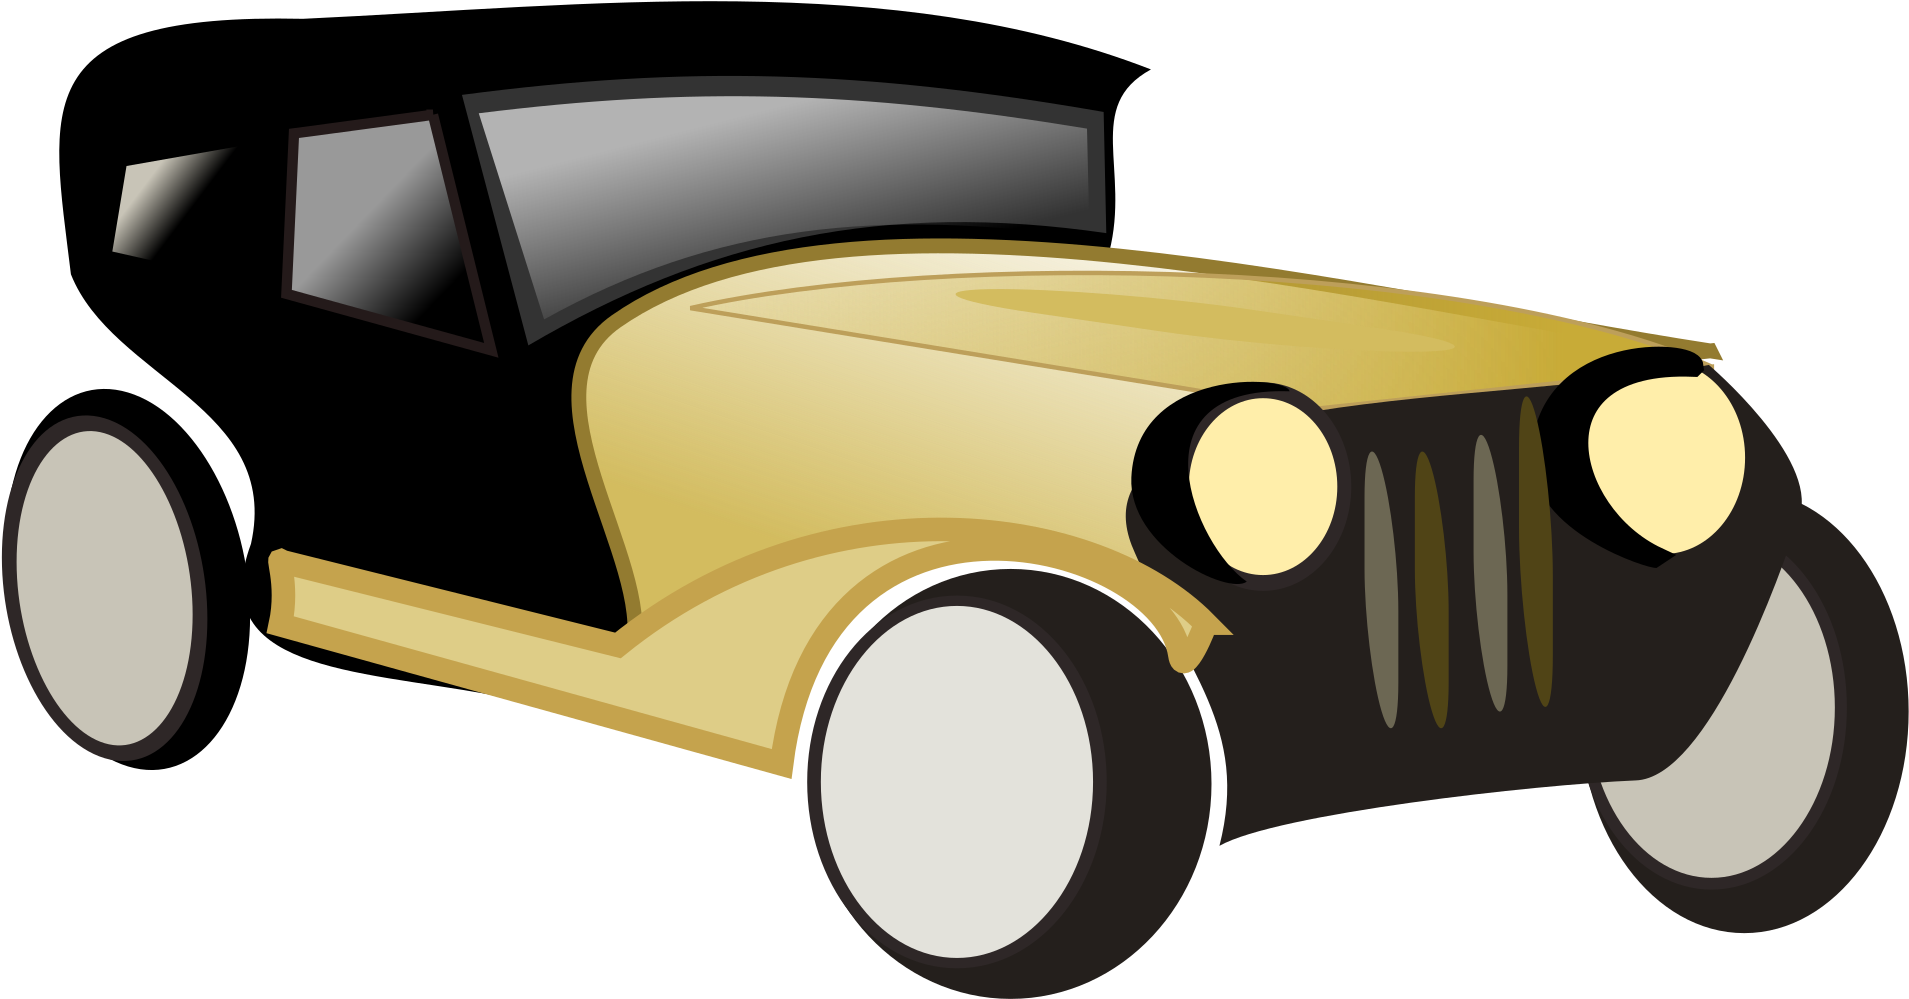 Download Classic Car Clipart 1940s Car - Vintage Car Cartoon Png PNG Image  with No Background 